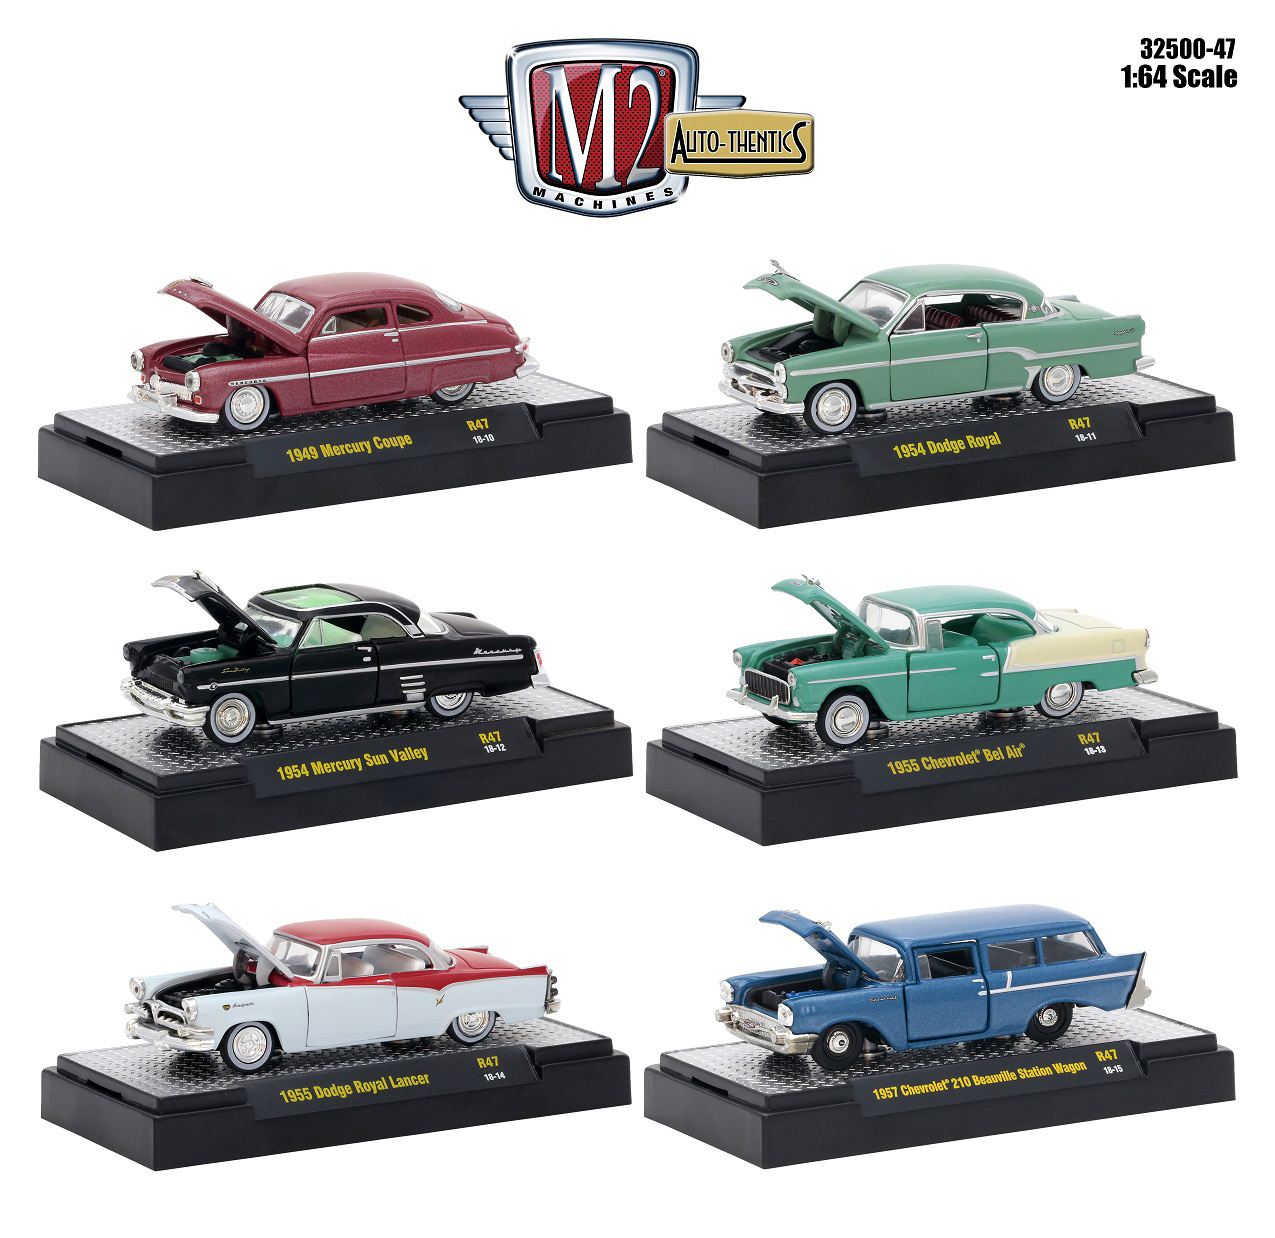 Auto Thentics 6 Piece Set Release 47 In Display Cases 1/64 Diecast Model Cars By M2 Machines